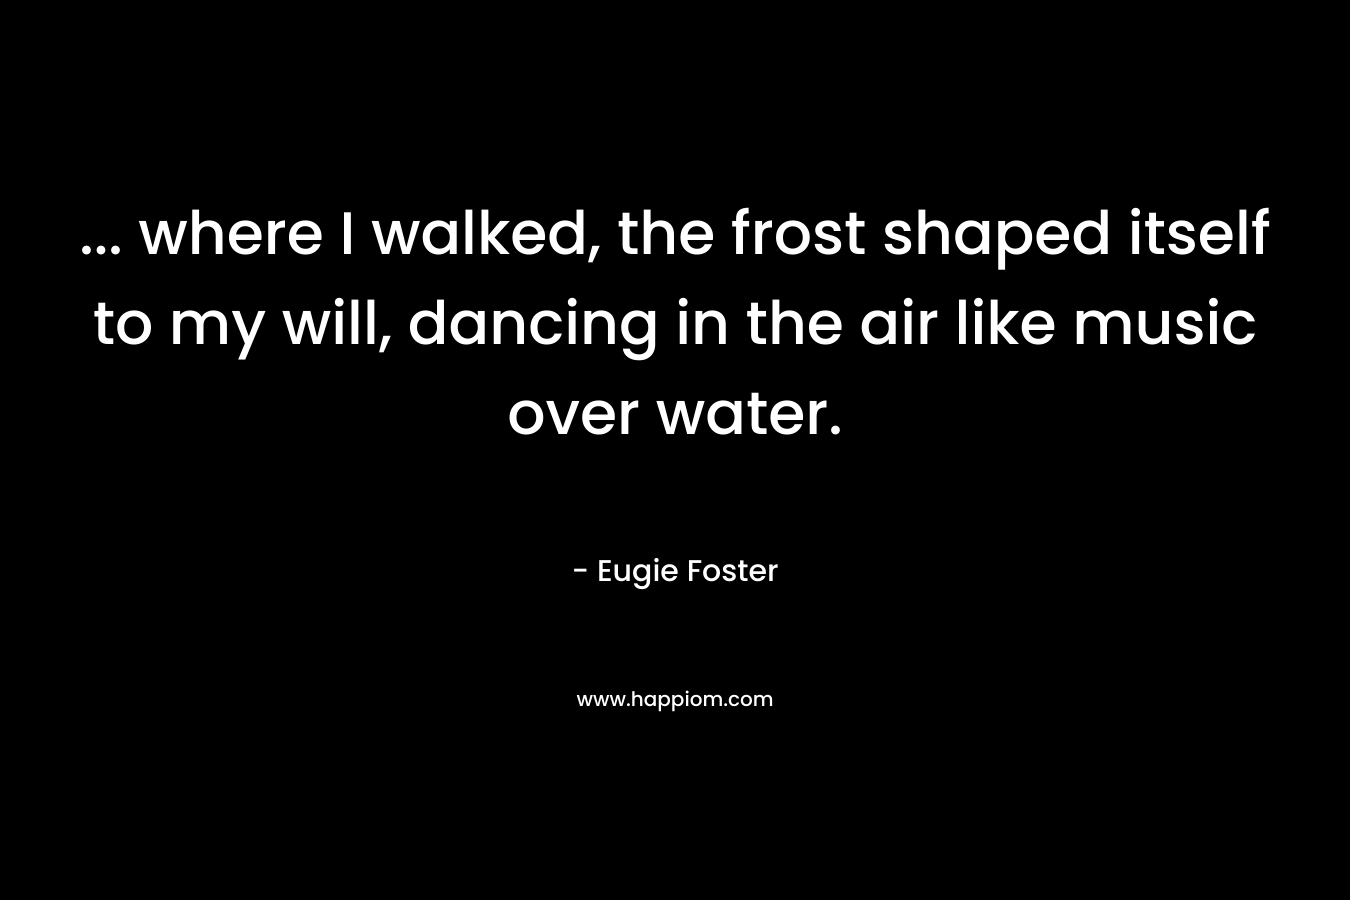 ... where I walked, the frost shaped itself to my will, dancing in the air like music over water.